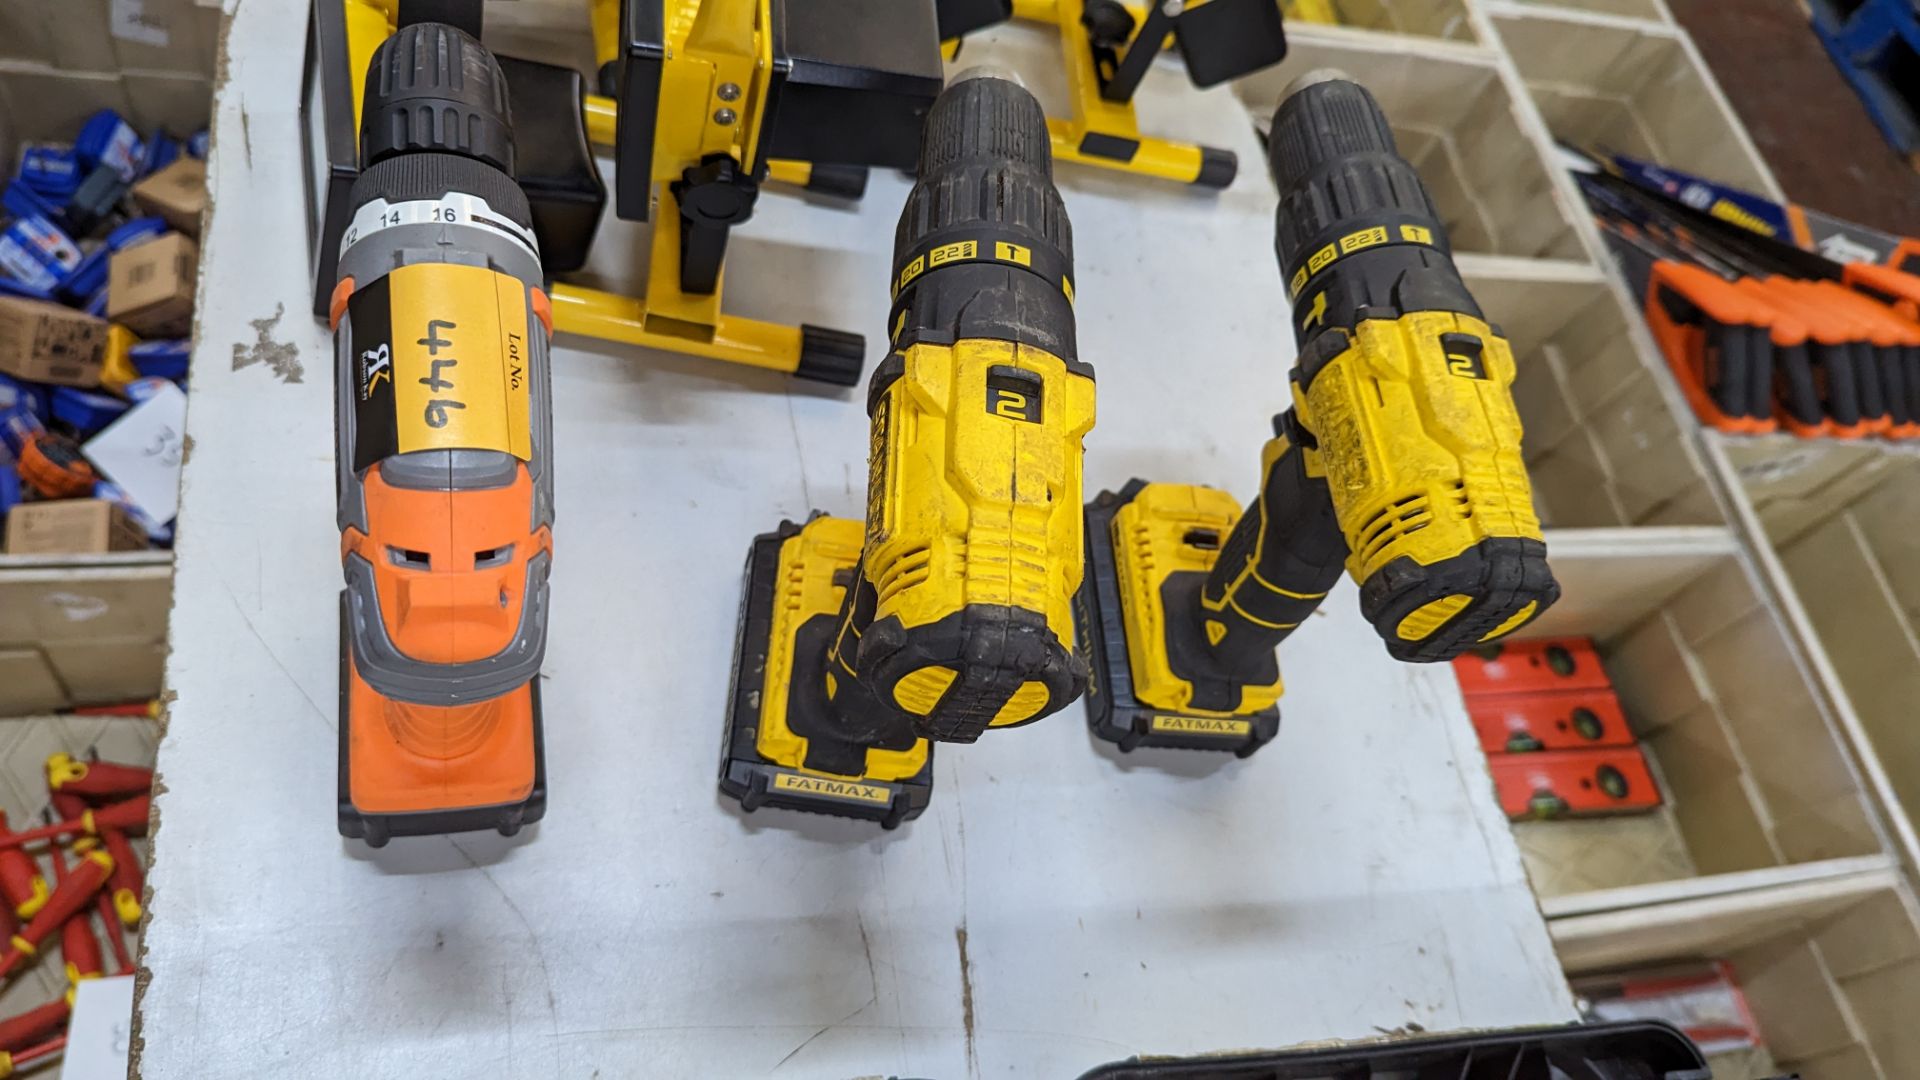 3 off 18 volt lithium cordless drills. Each drill includes an 18 volt lithium battery. This lot do - Image 6 of 7